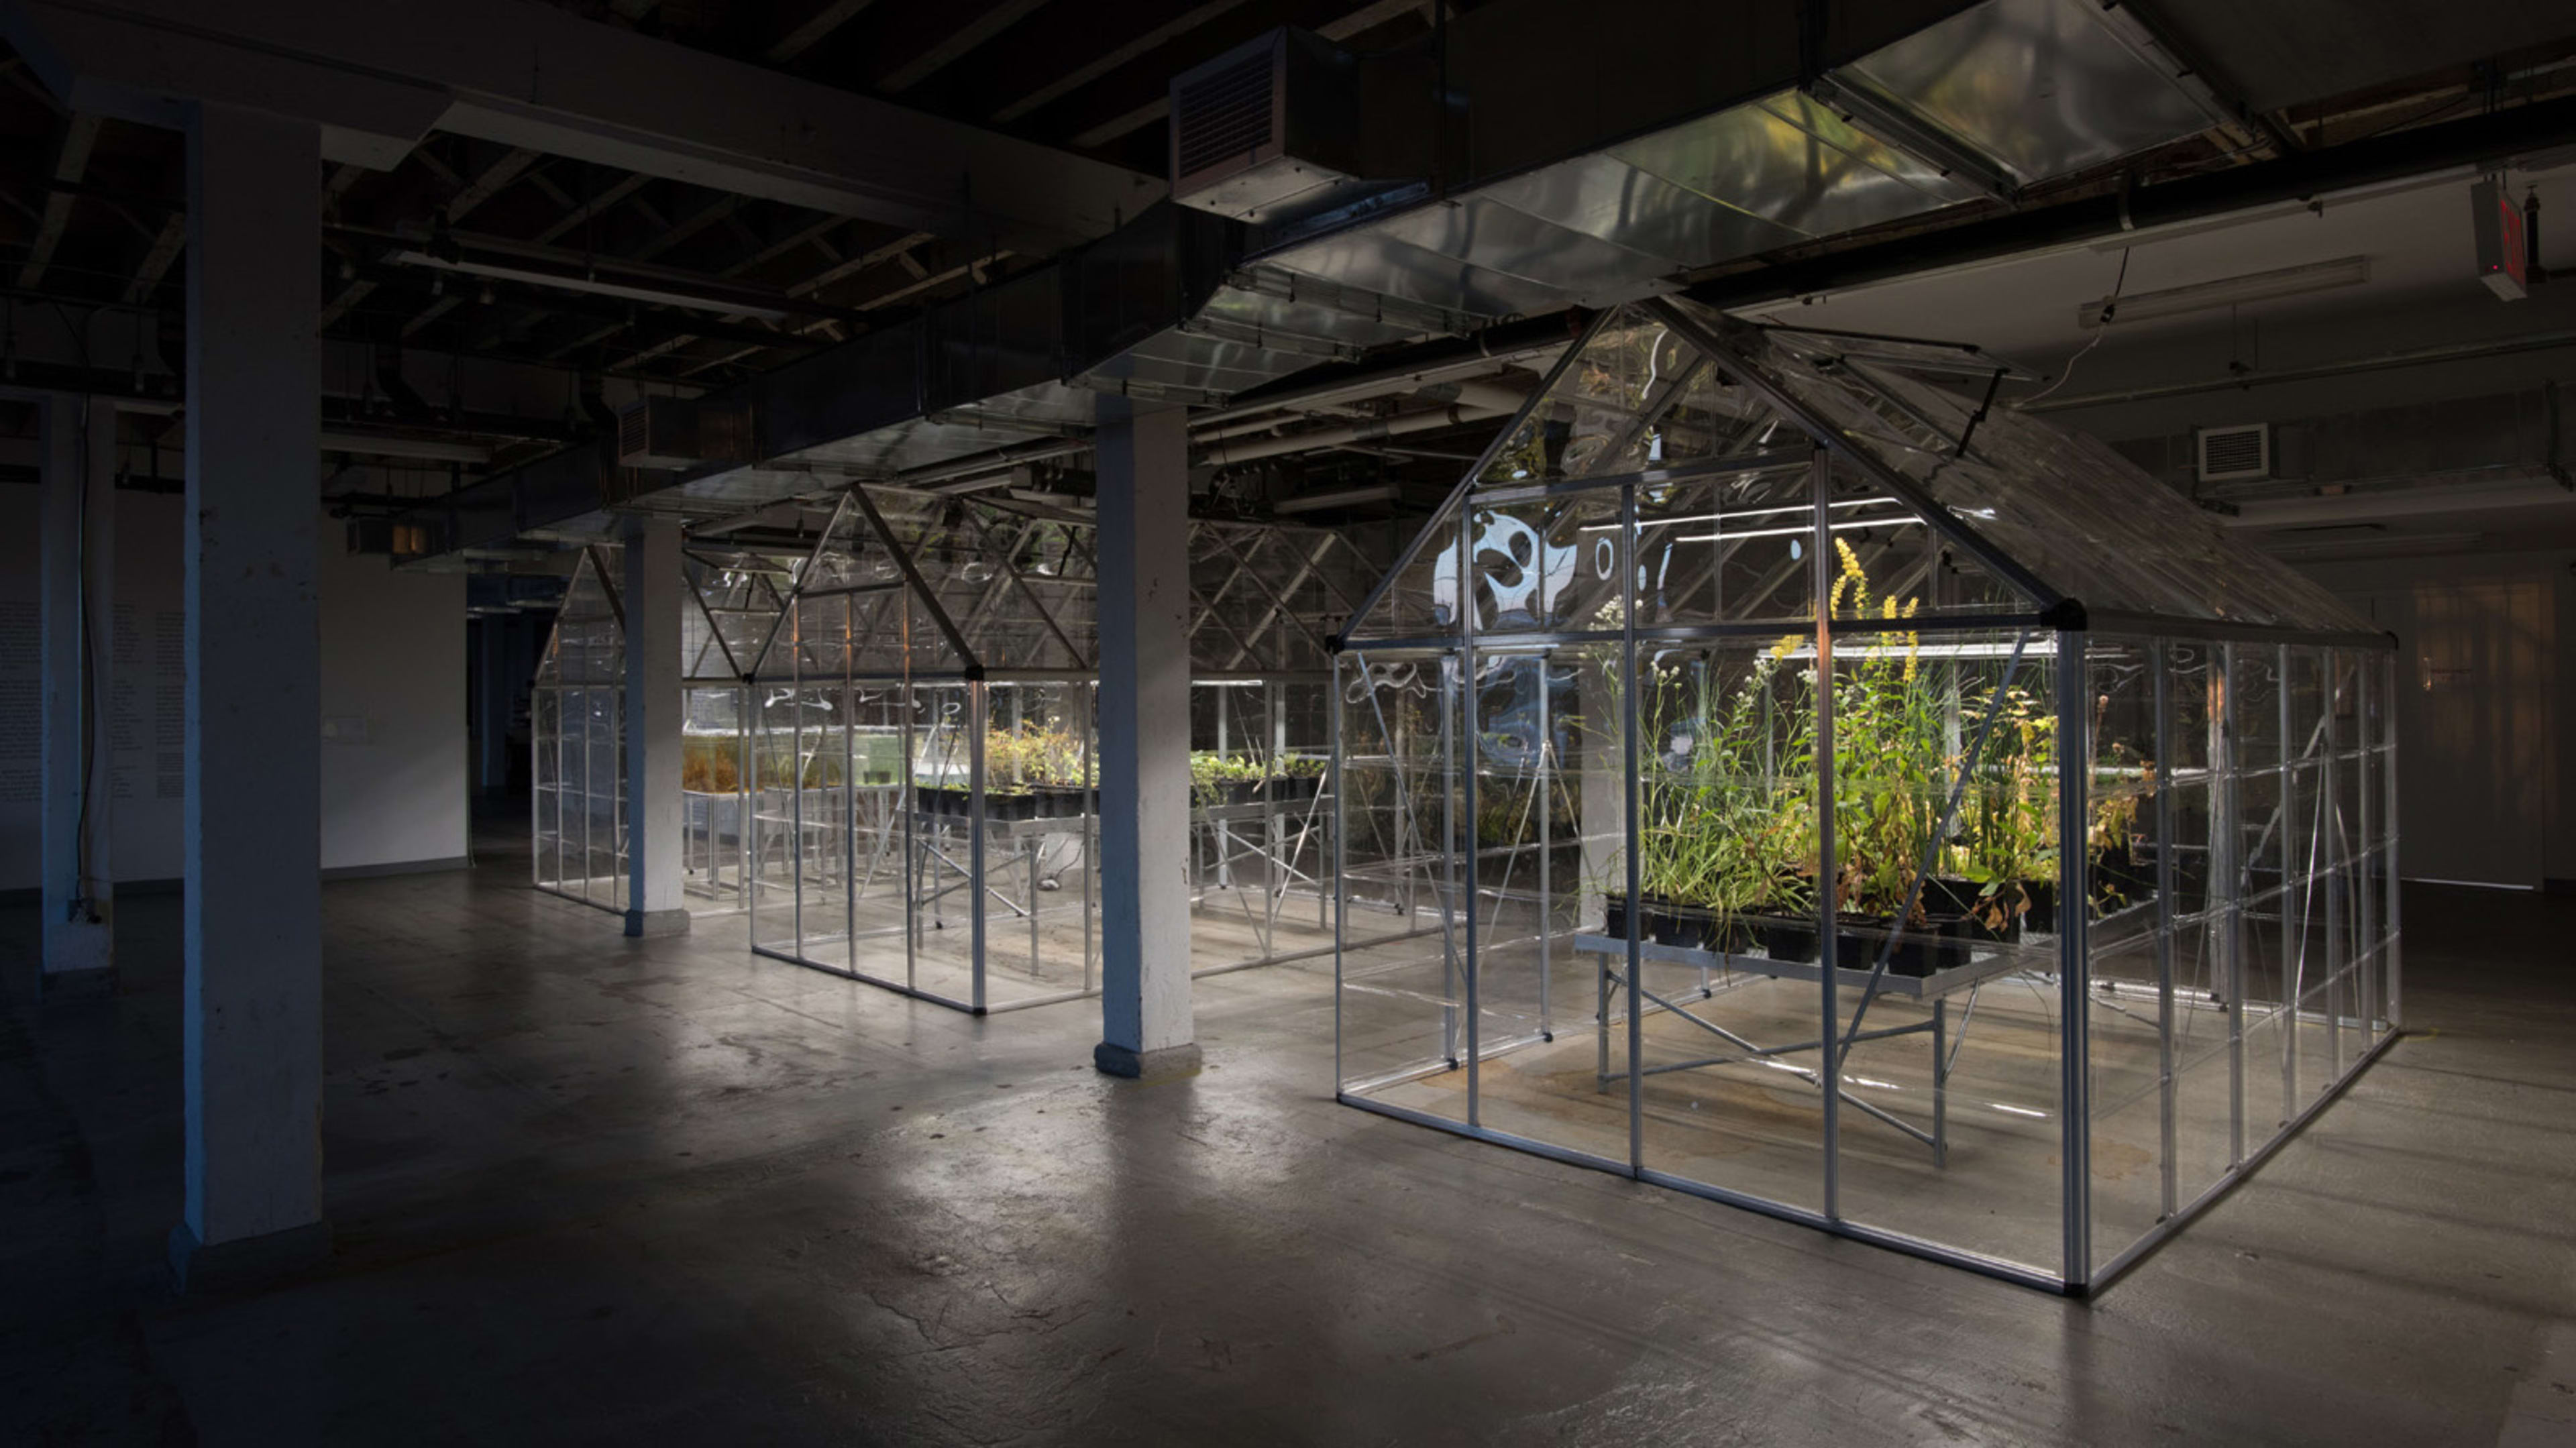 These plants went extinct in NYC. Now, an artist is reintroducing them